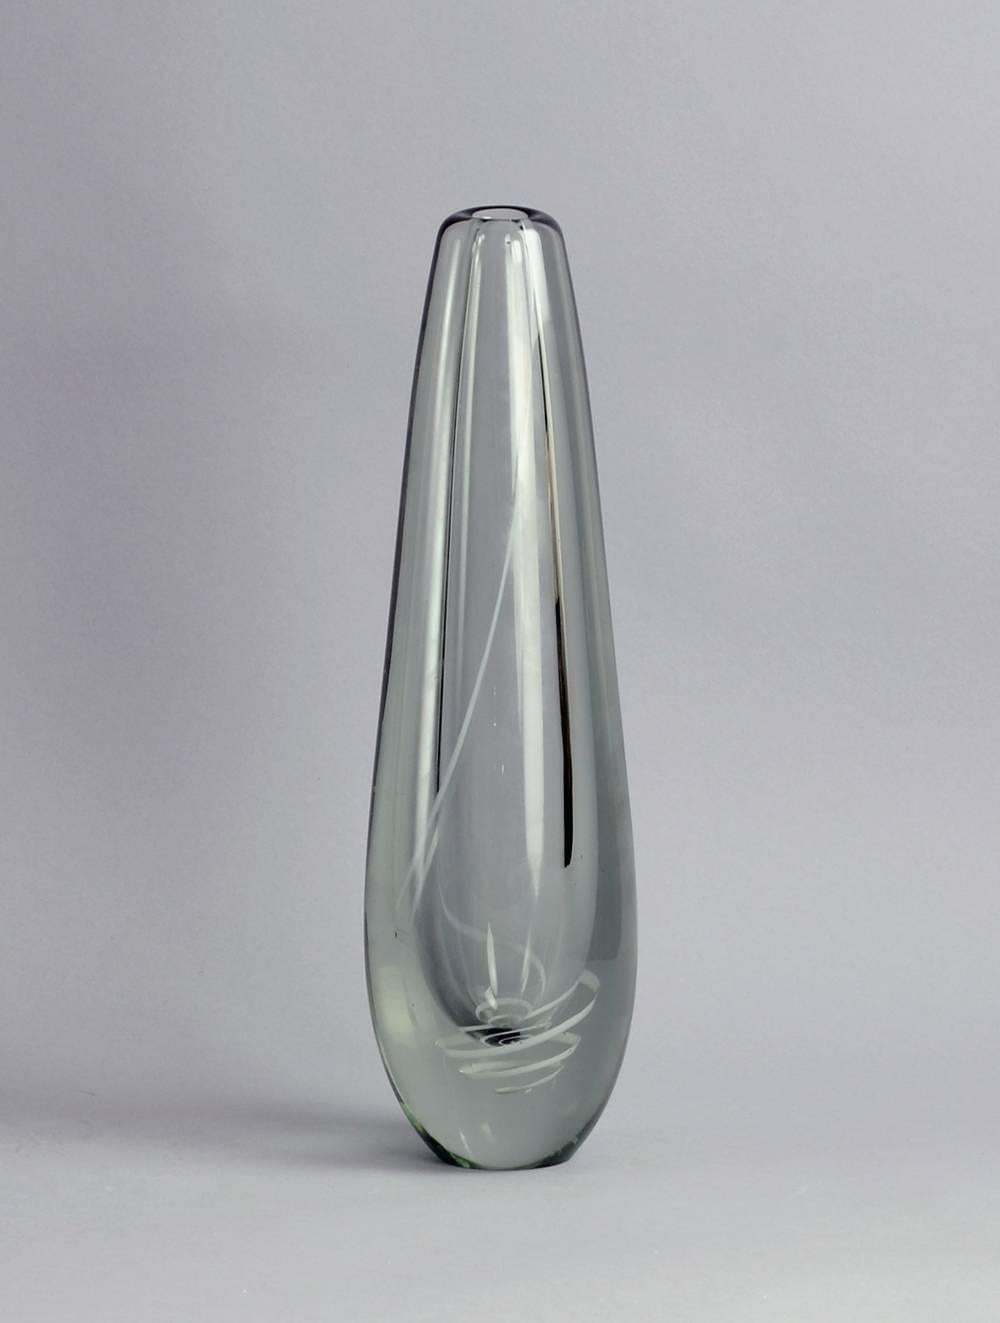 Gunnel Nyman for Nuutajarvi Nottsjo, Finland.

 "Serpentini" (Serpentine) vase in glare glass with white internal decoration, 1940s.
Measures: Height 14 1/4" (37.5cm), width 4 1/2" (11.5cm).
Acid painted "G. Nyman